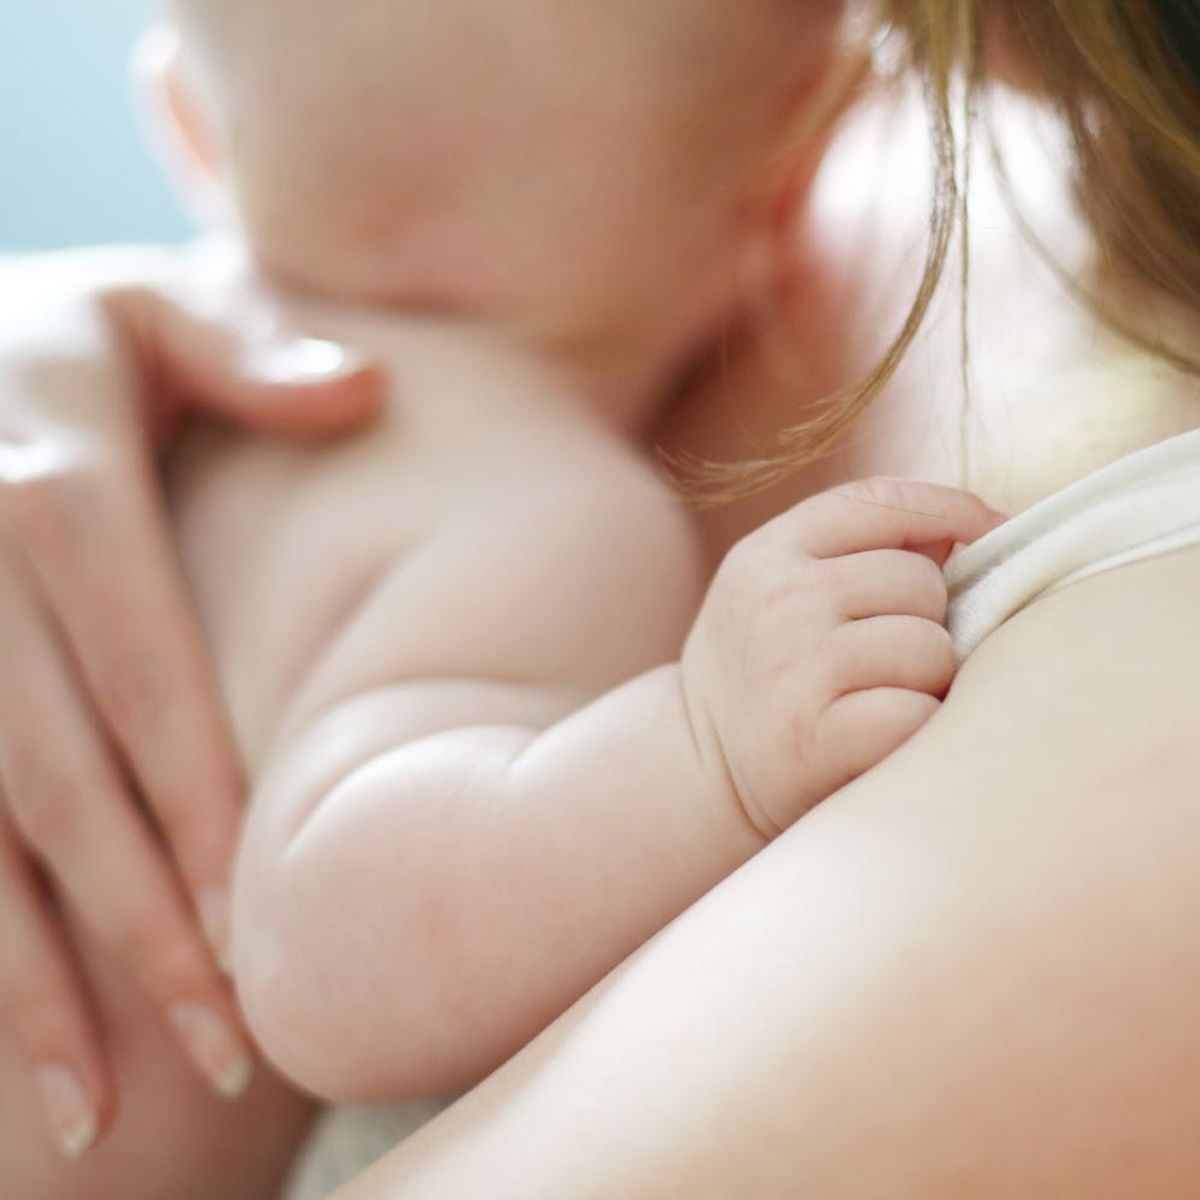 US Delegates Reportedly Opposed a World Health Resolution Supporting Breastfeeding